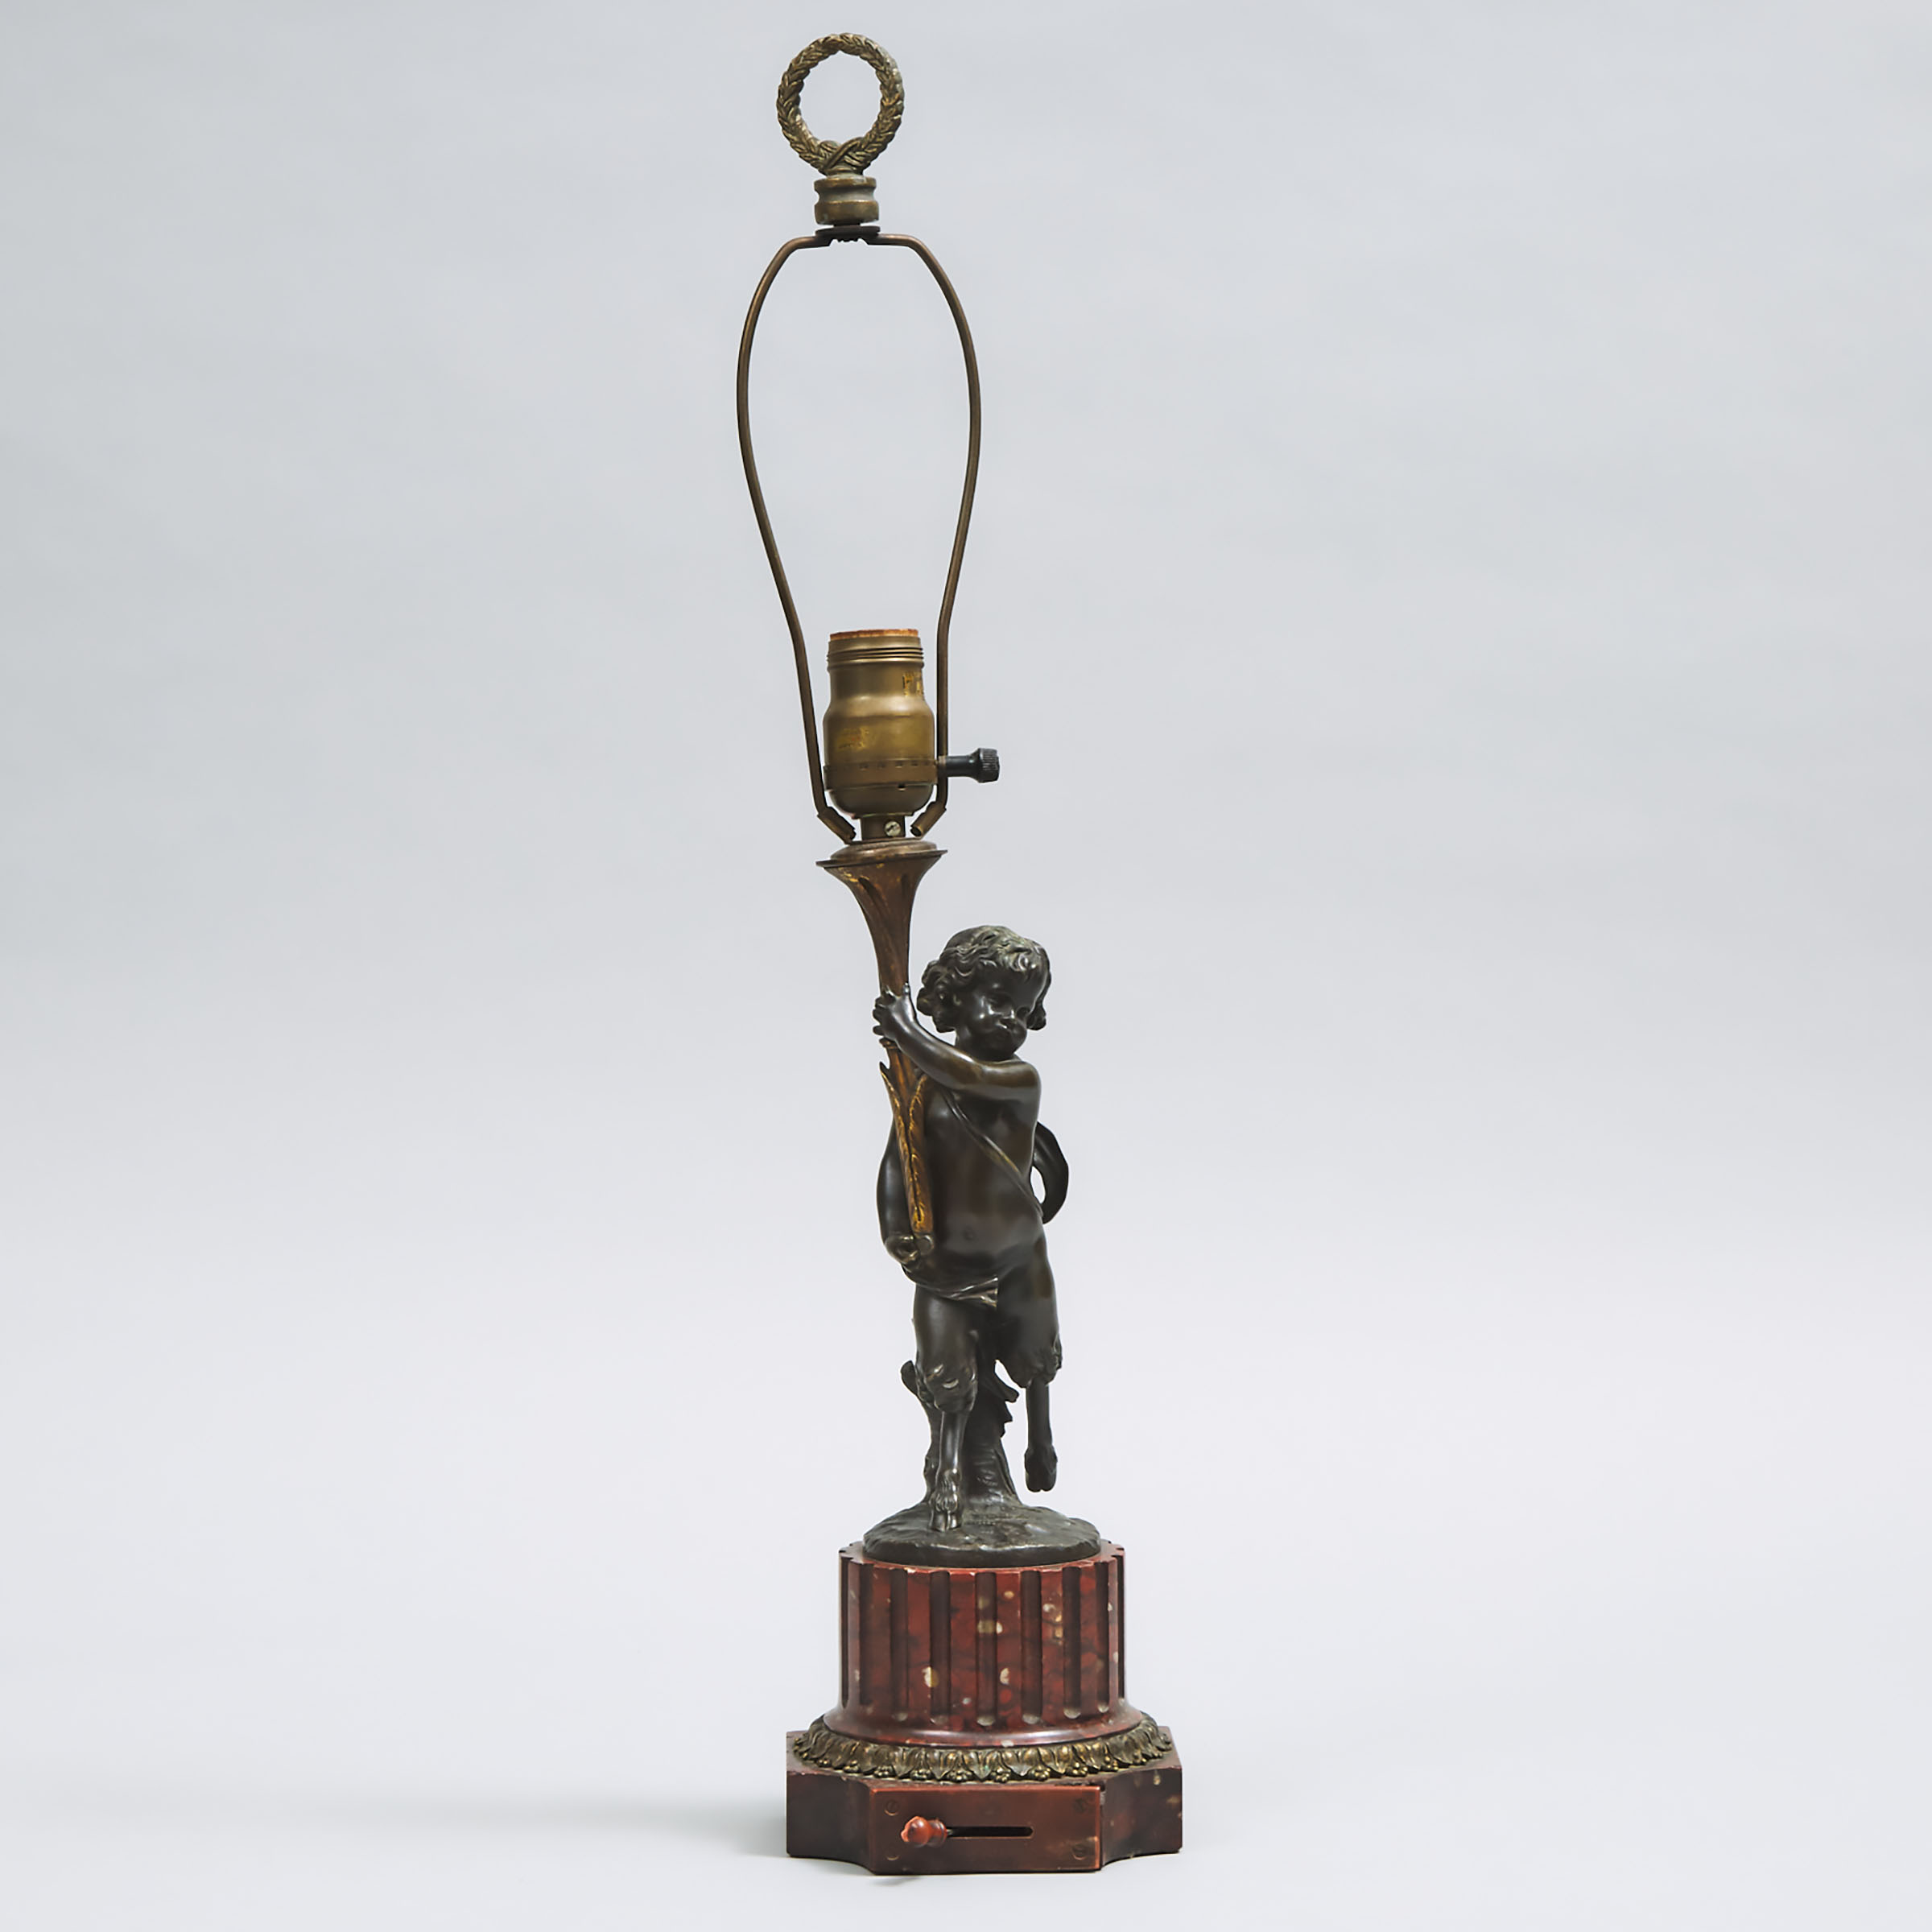 French Neoclassical Gilt and Patinated Bronze Cherubic Figural Table Lamp, early 20th century